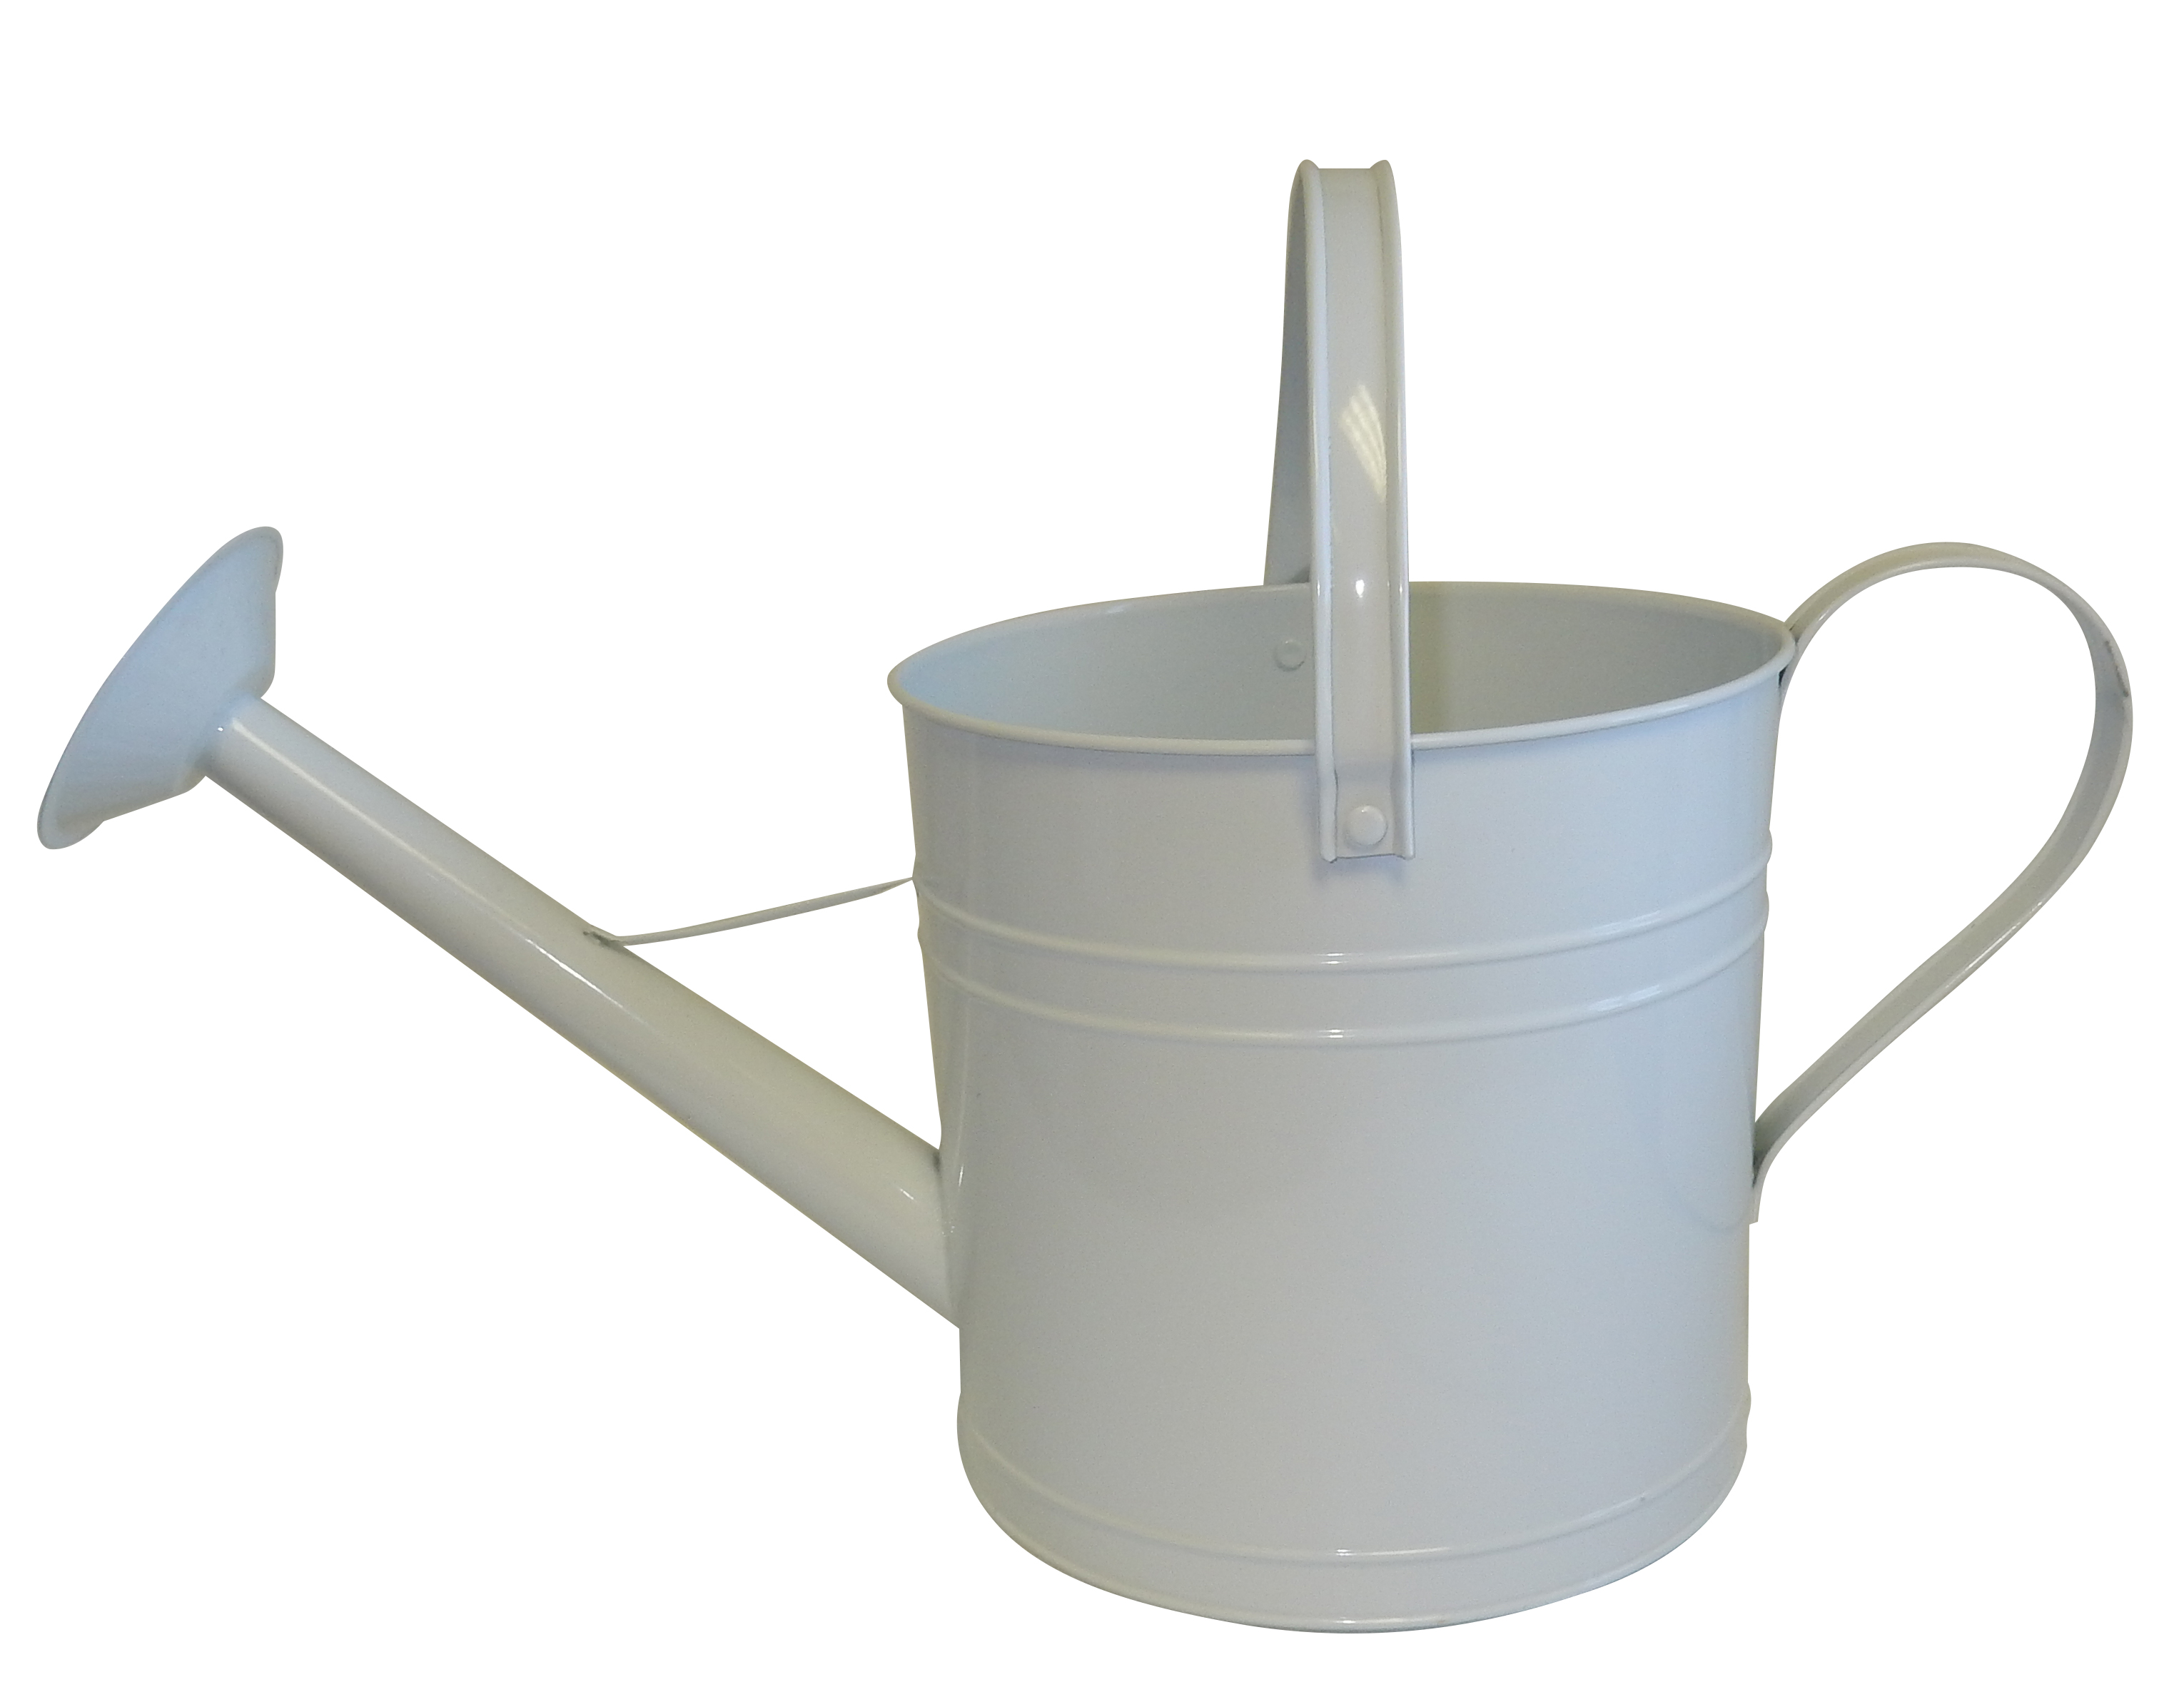 08.25 Watering Can Planter White - 6 per case